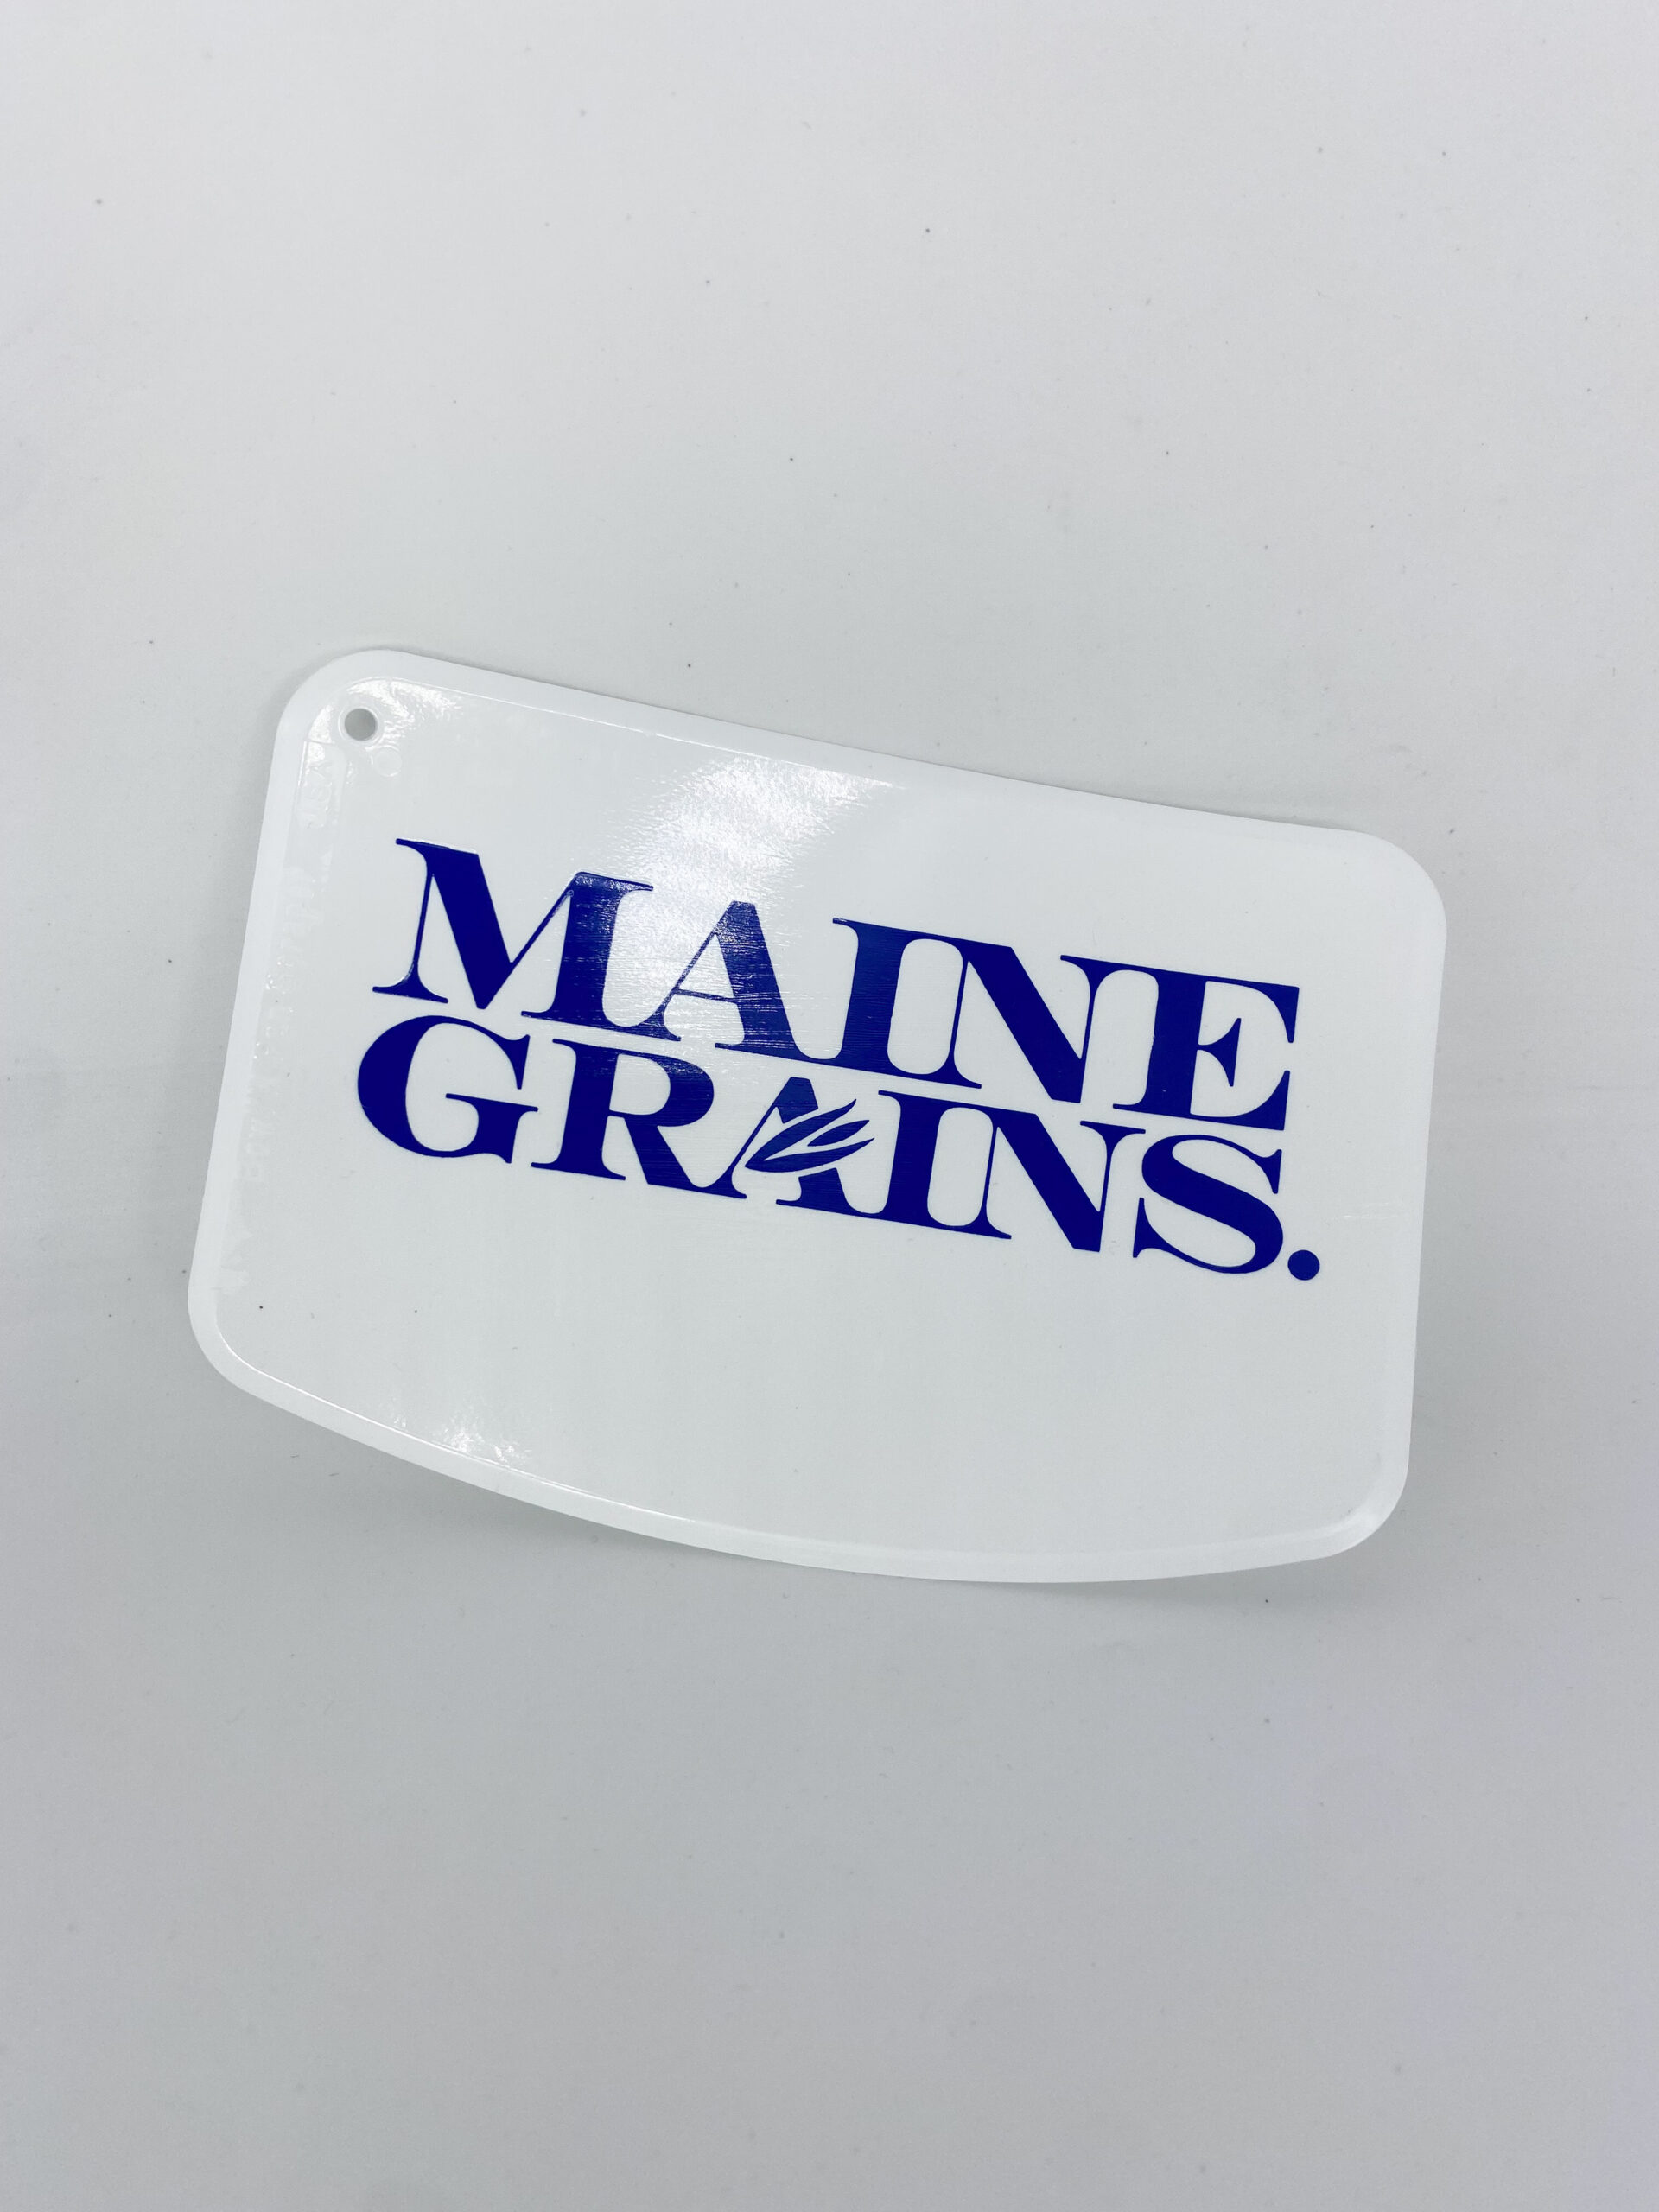 https://mainegrains.com/wp-content/uploads/2019/09/IMG_0909-scaled.jpg